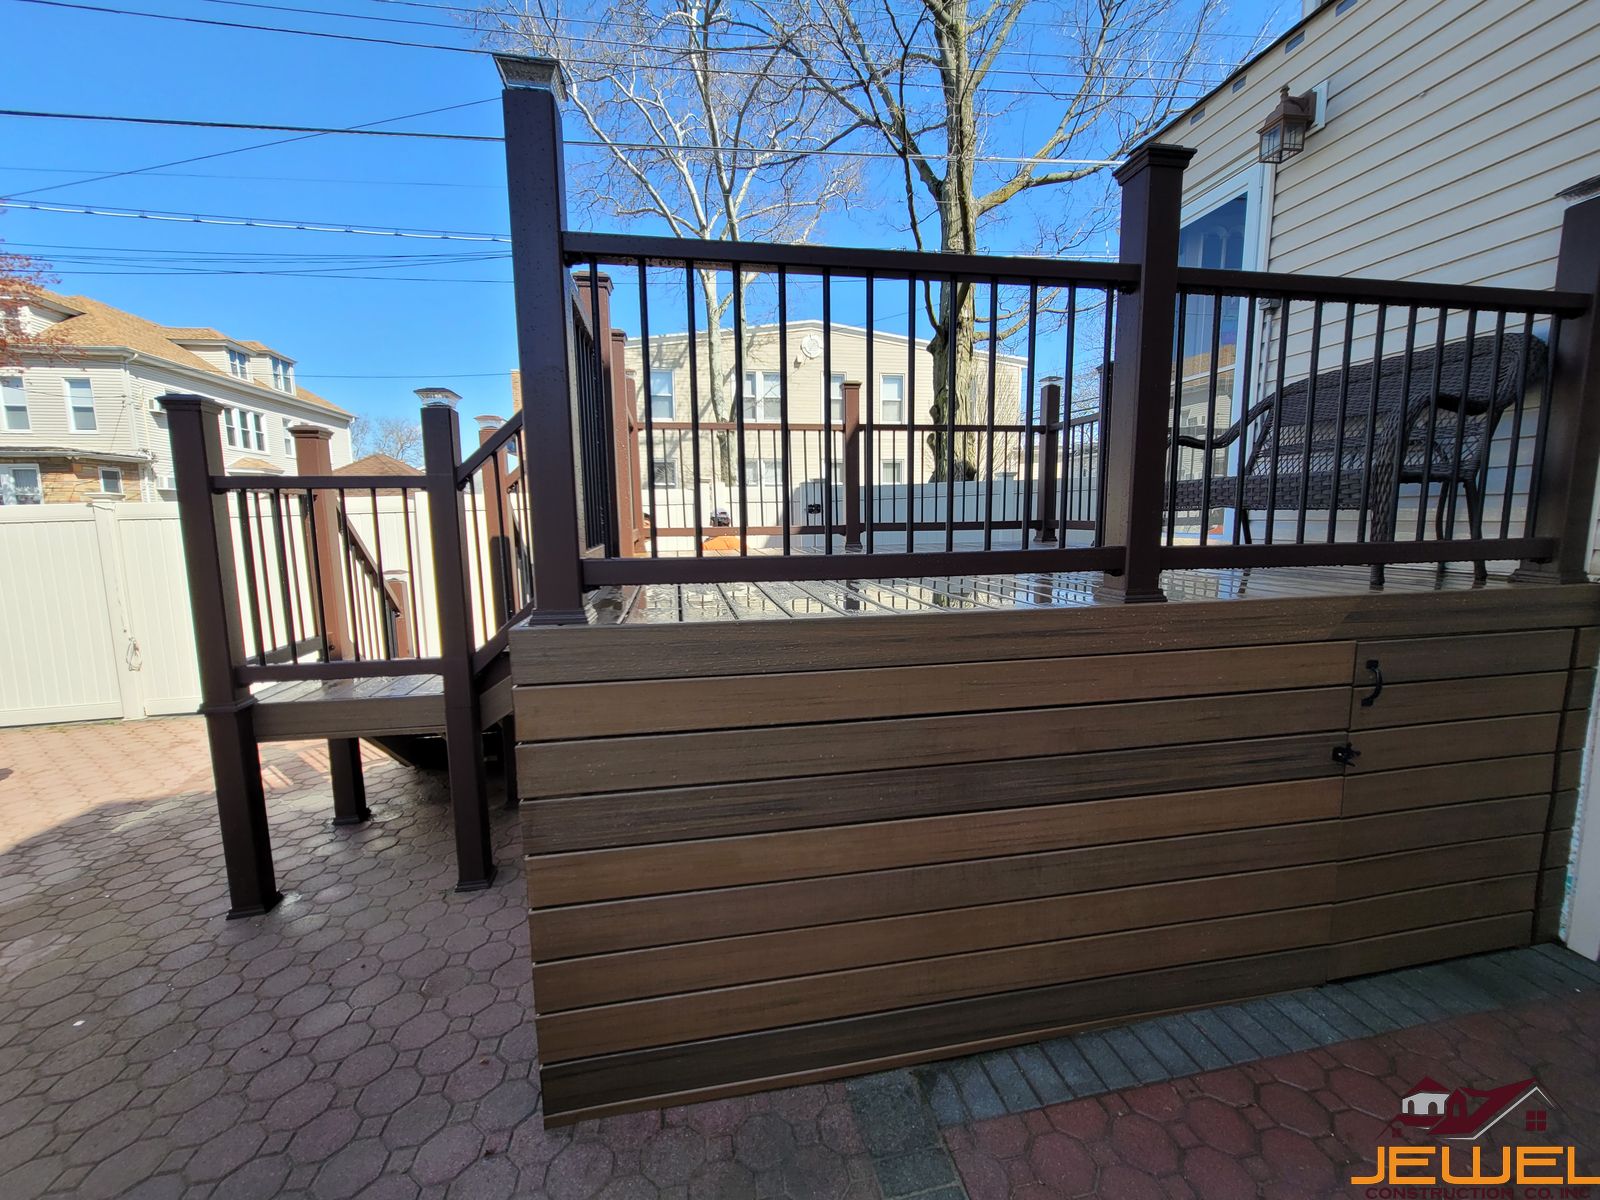 deck-and-patio-builders-park-slope-brooklyn-4